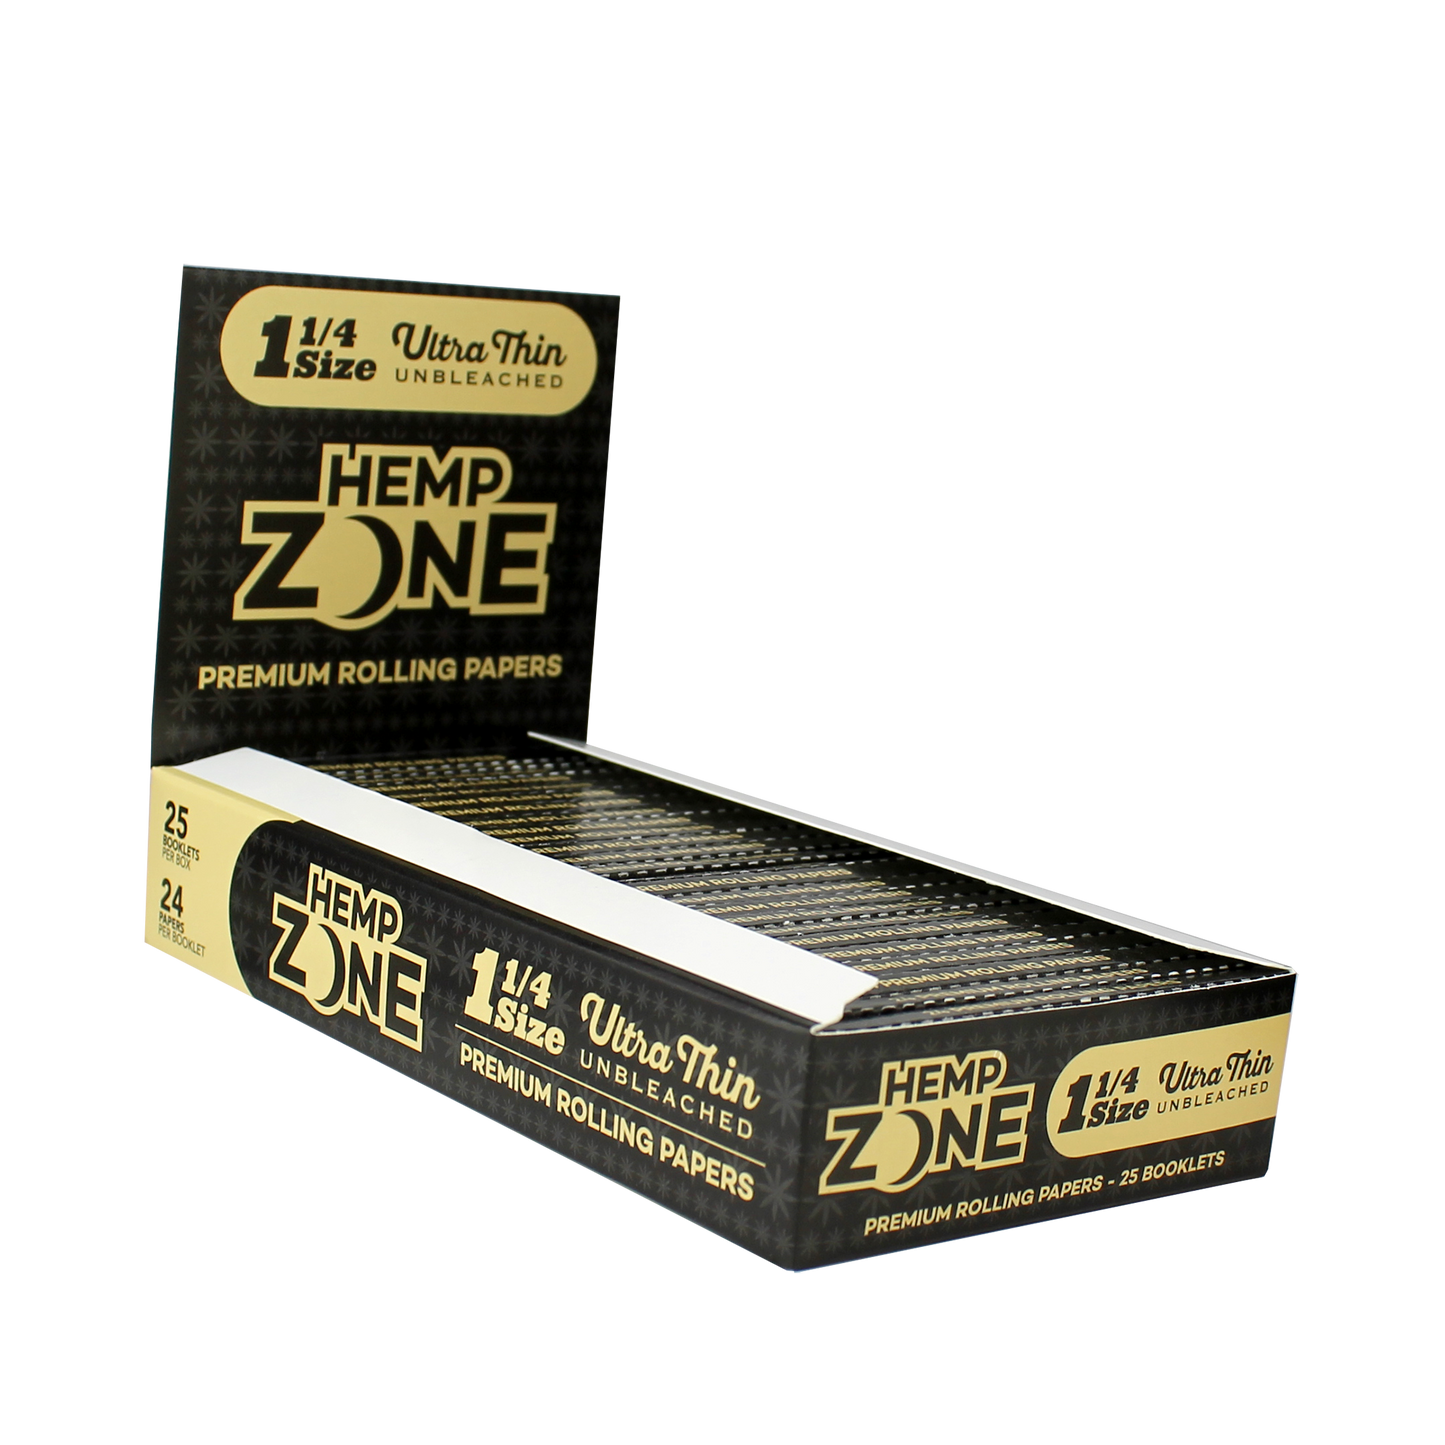 Hemp Zone: 1 1/4 Organic Ultra Thin Rolling Papers Unbleached